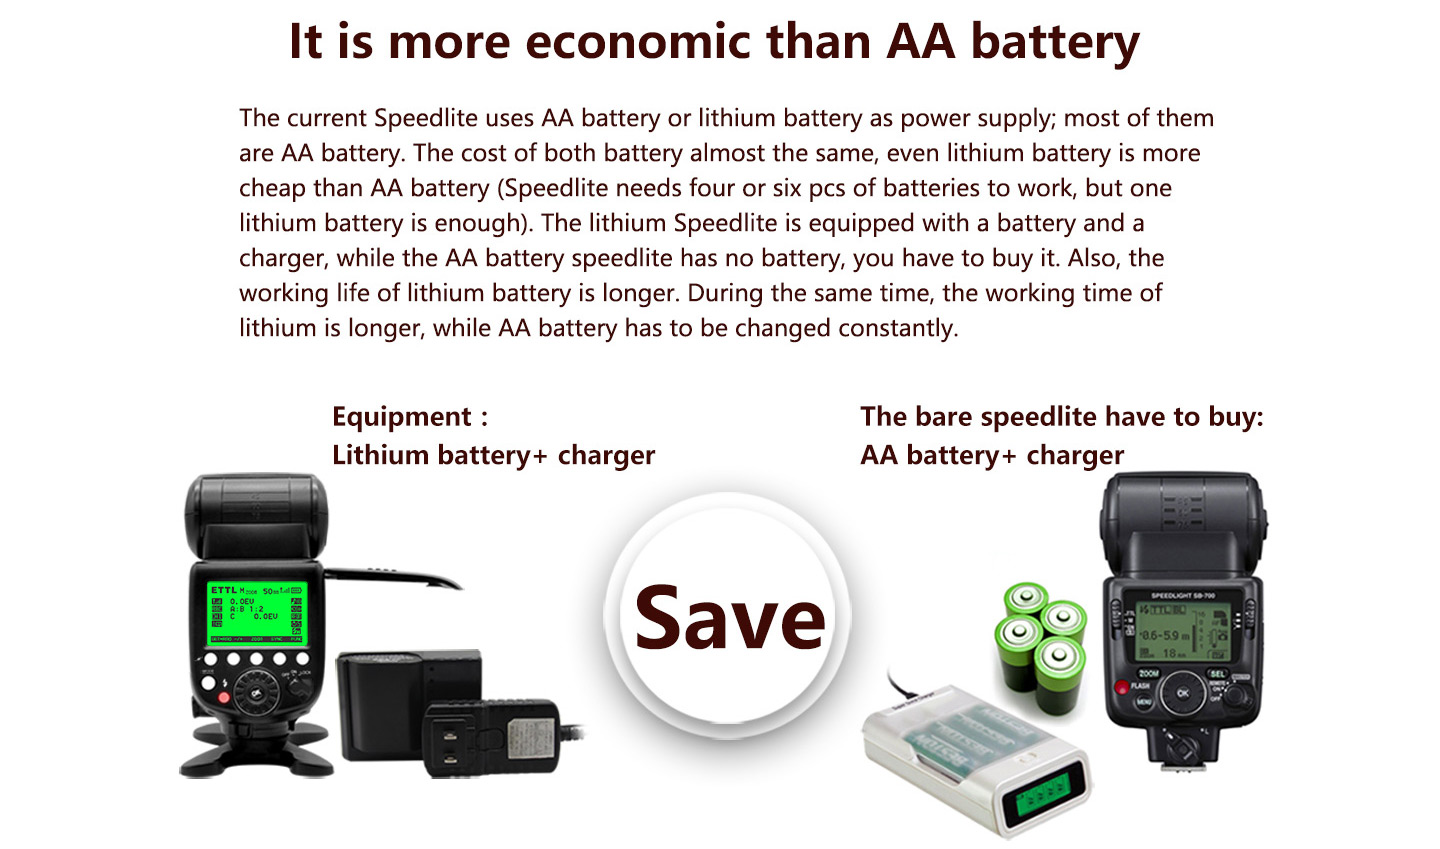 lt is more economic than AA battery